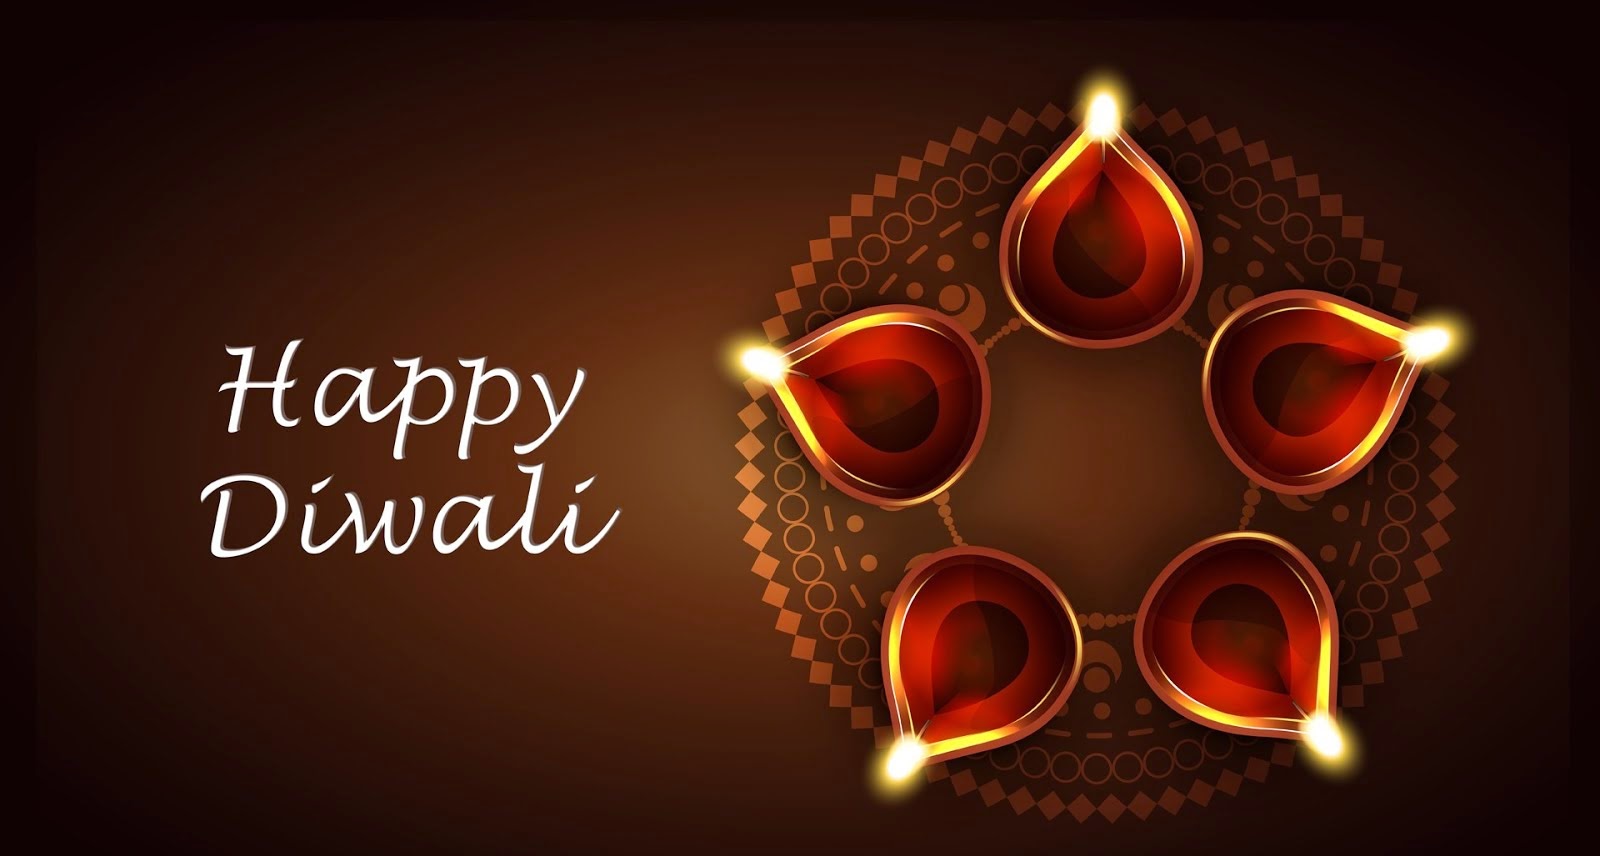 Happy Diwali November 14 Images, HD Pictures, Photos, Photographs,  Wallpapers, 3D Photo, And DP Pictures For WhatsApp, Facebook, And Instagram